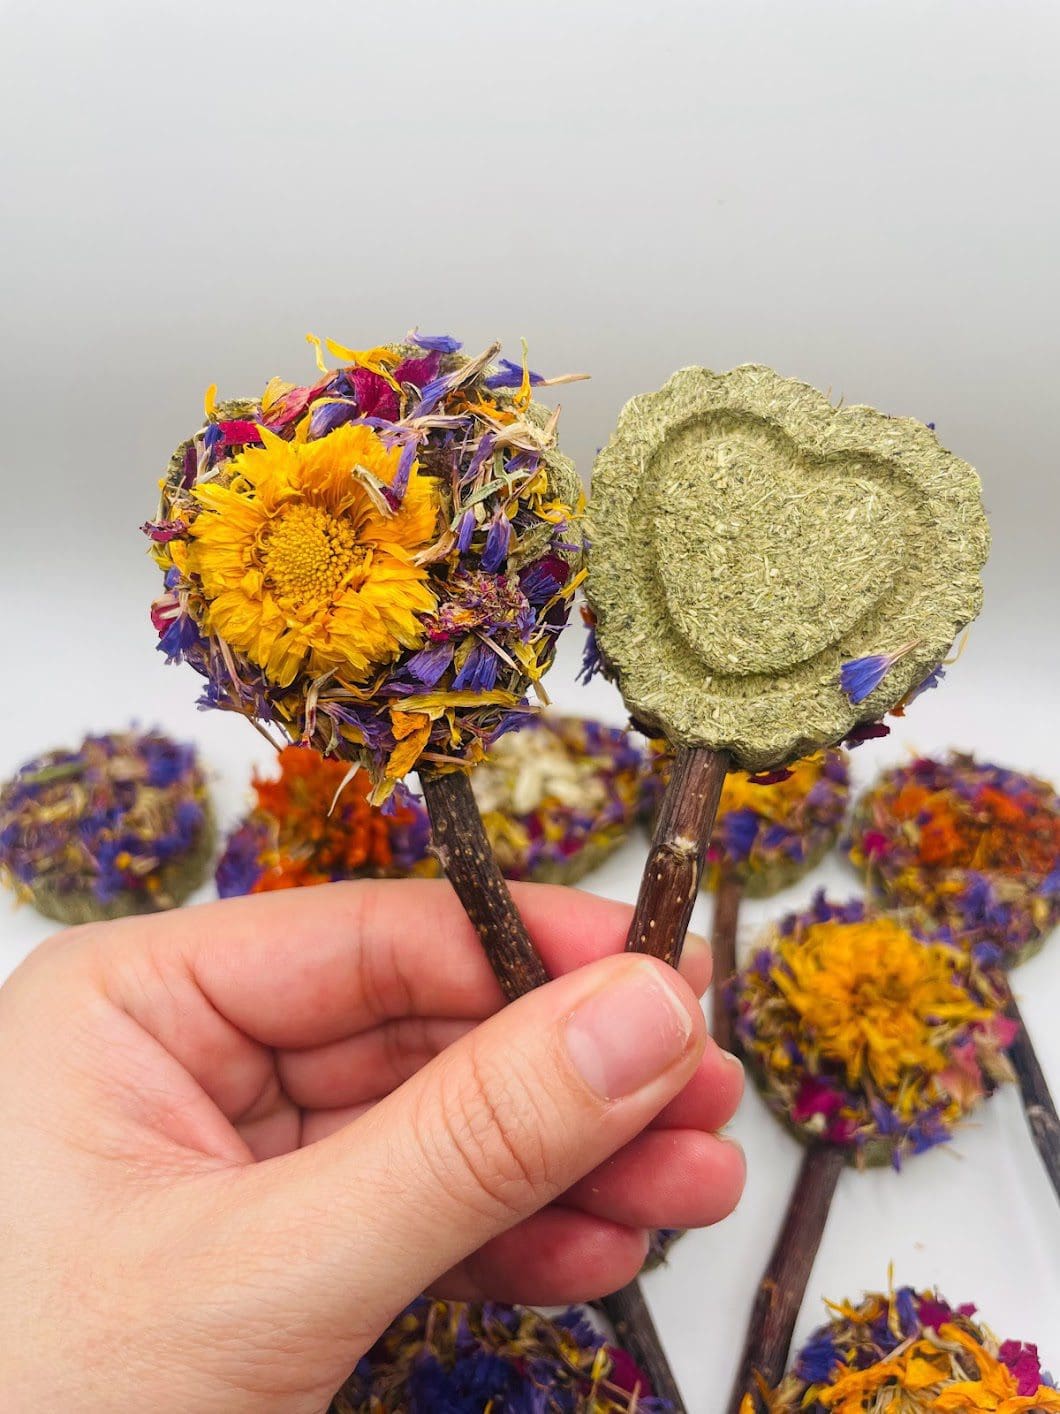 Heart-Shaped Hay Grass Lollipop With Petals Forage Treat for Rabbit, Hamsters, Guinea Pigs, Chinchillas & Small Animals